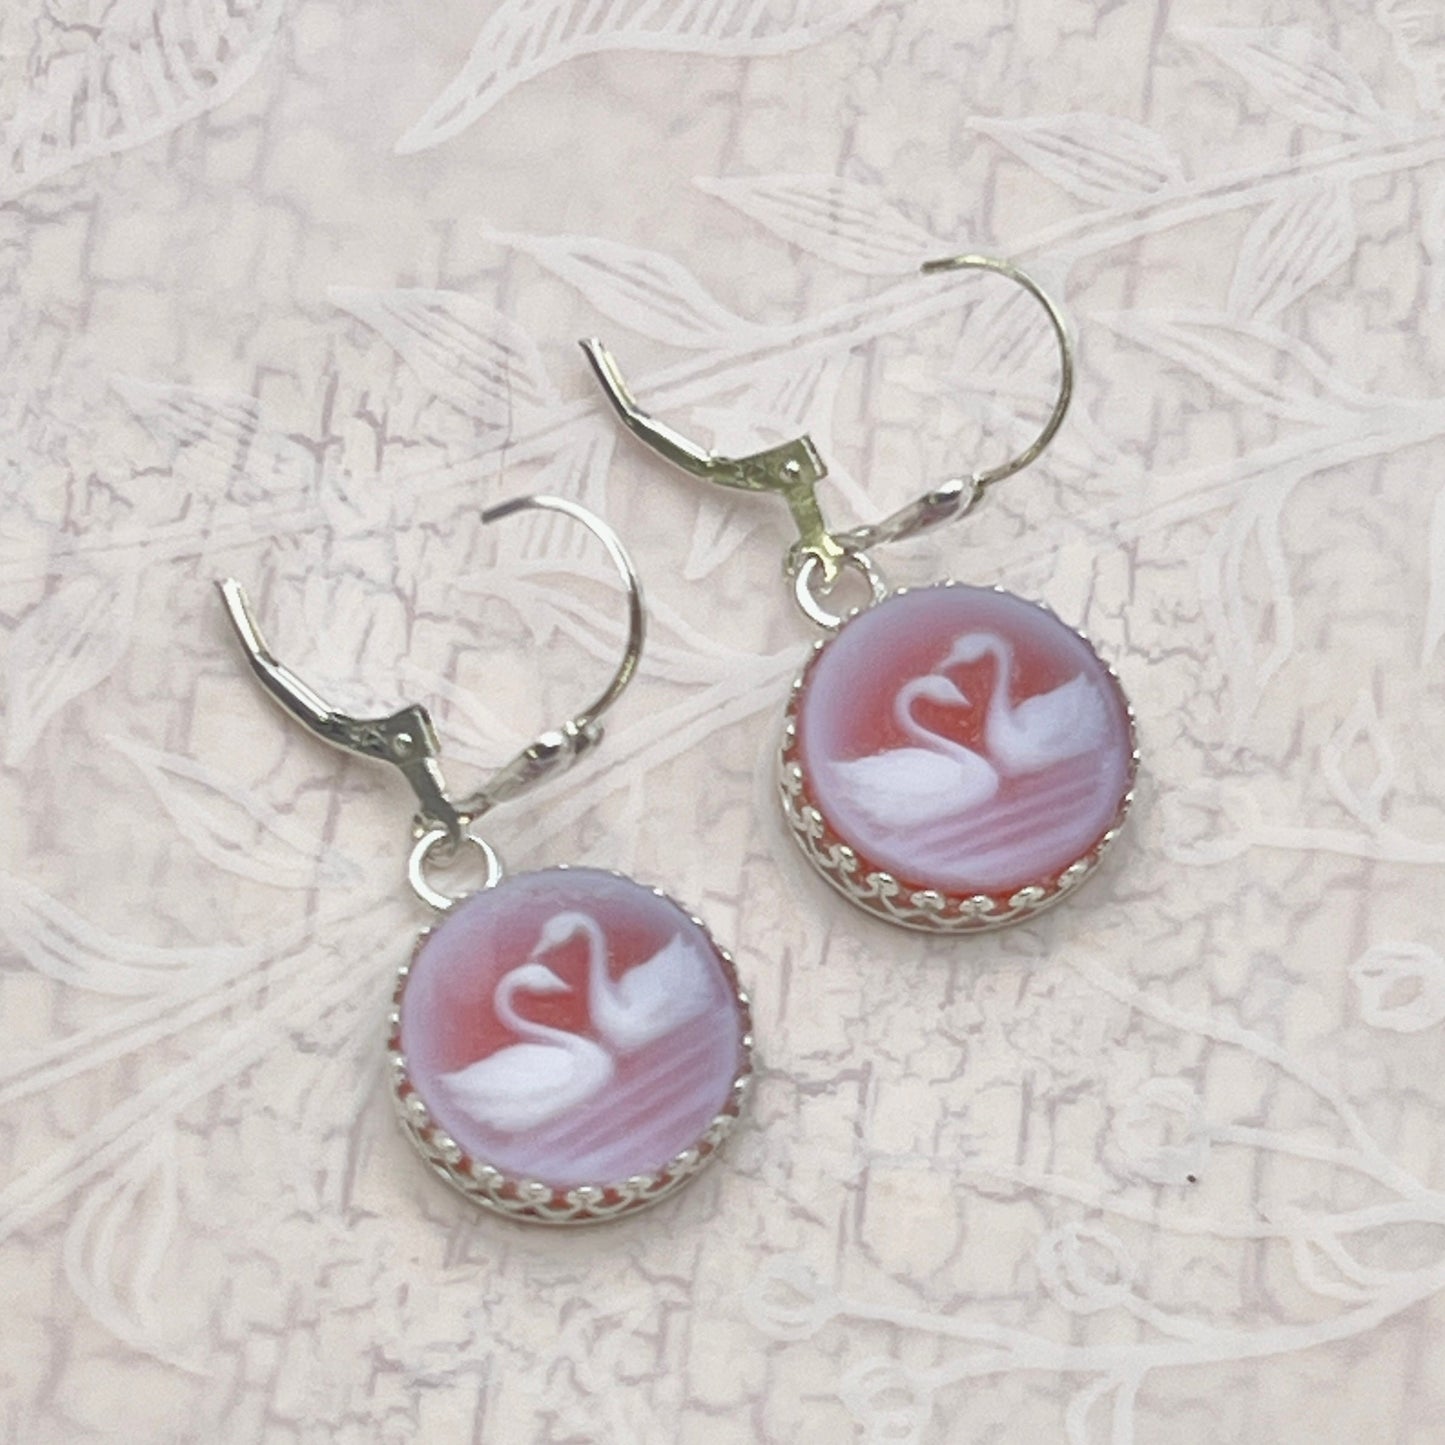 Gemstone Swan Cameo Earrings, Romantic Love Birds, Unique Anniversary Gifts for Wife, Sterling Silver Heart Earrings, Real Authentic Cameo